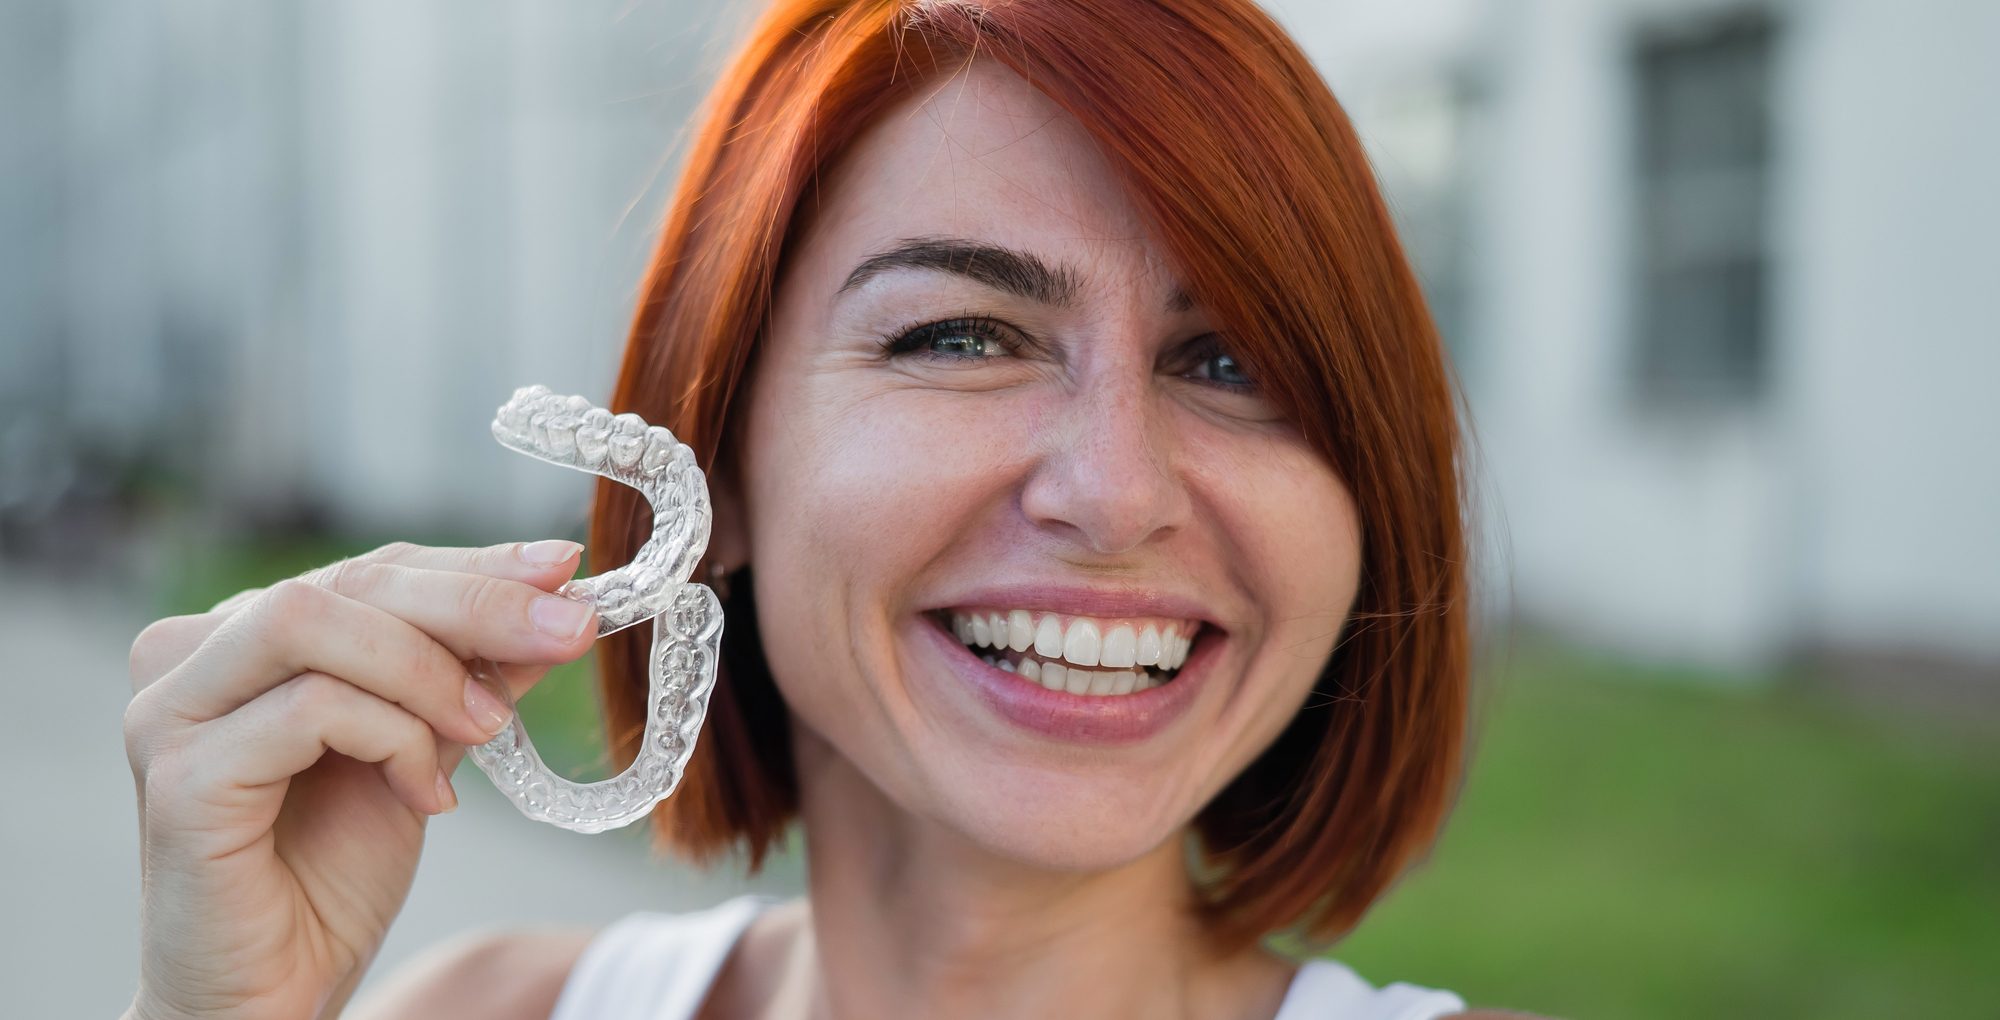 Red-haired Caucasian woman holding transparent mouthguards for bite correction outdoors. A girl with a beautiful snow-white smile uses silicone braces